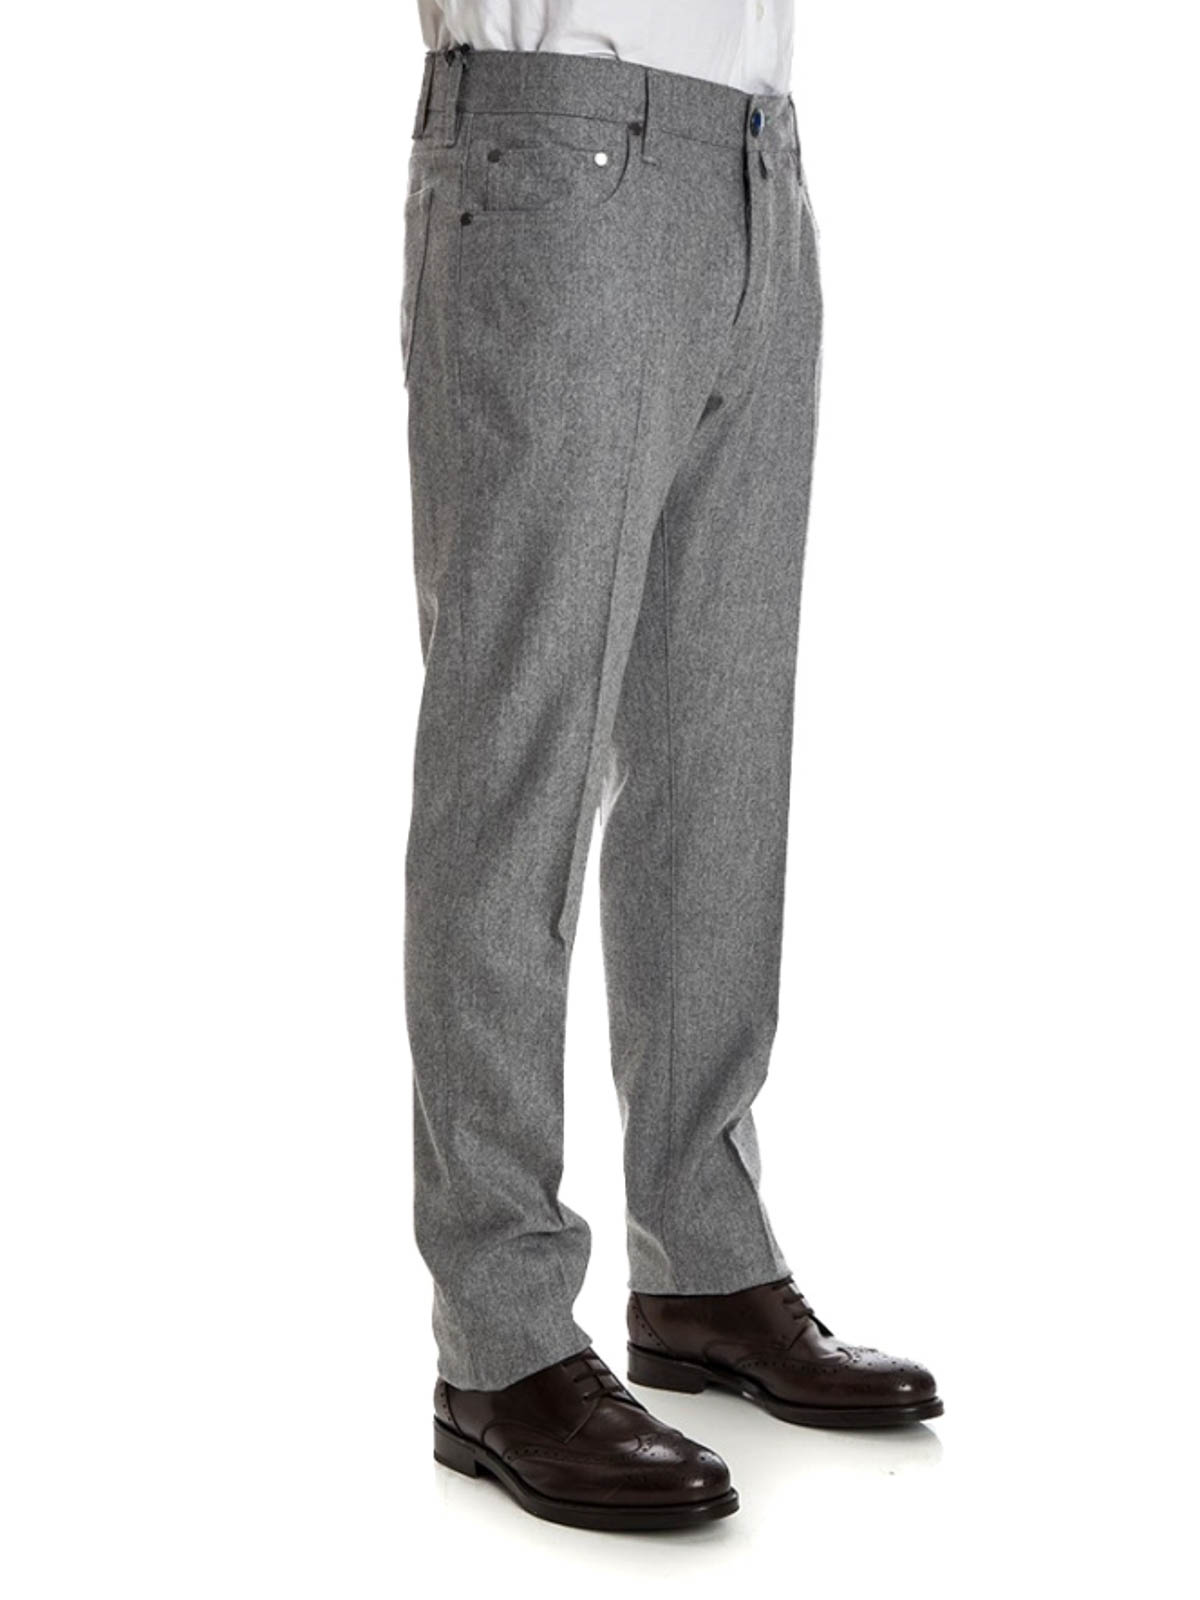 J.Crew Charcoal Tollegno Worsted Wool Slim-Fit Dress Pants - Men | Best  Price and Reviews | Zulily